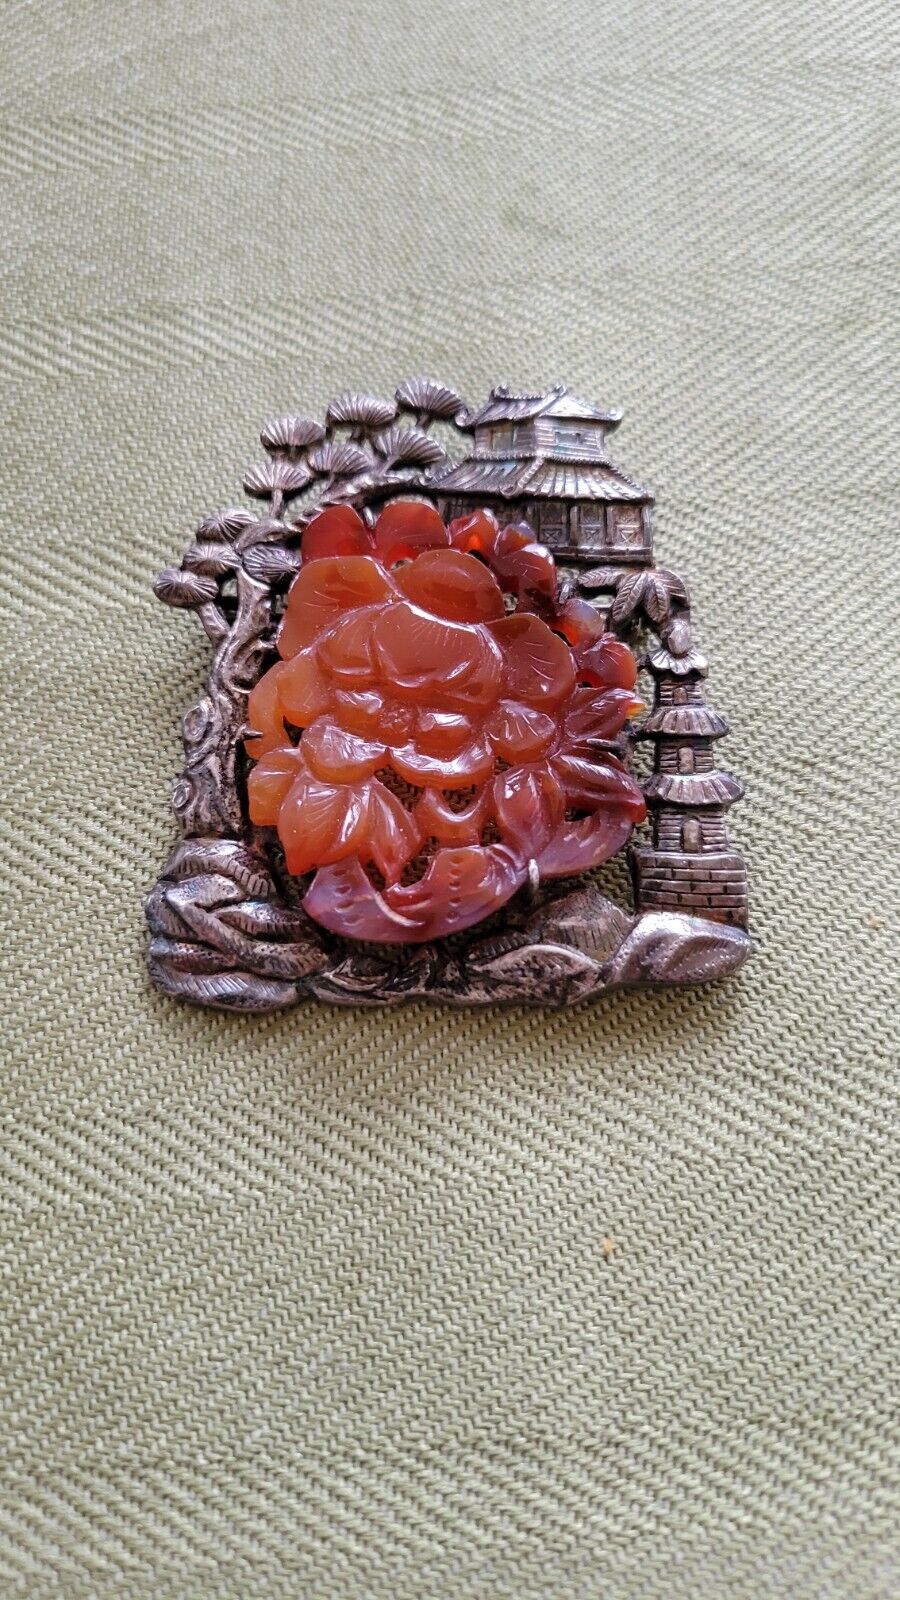 ANTIQUE LATE QING DYNASTY CHINESE EXPORT STERLING SILVER AGATE STONE BROOCH PIN